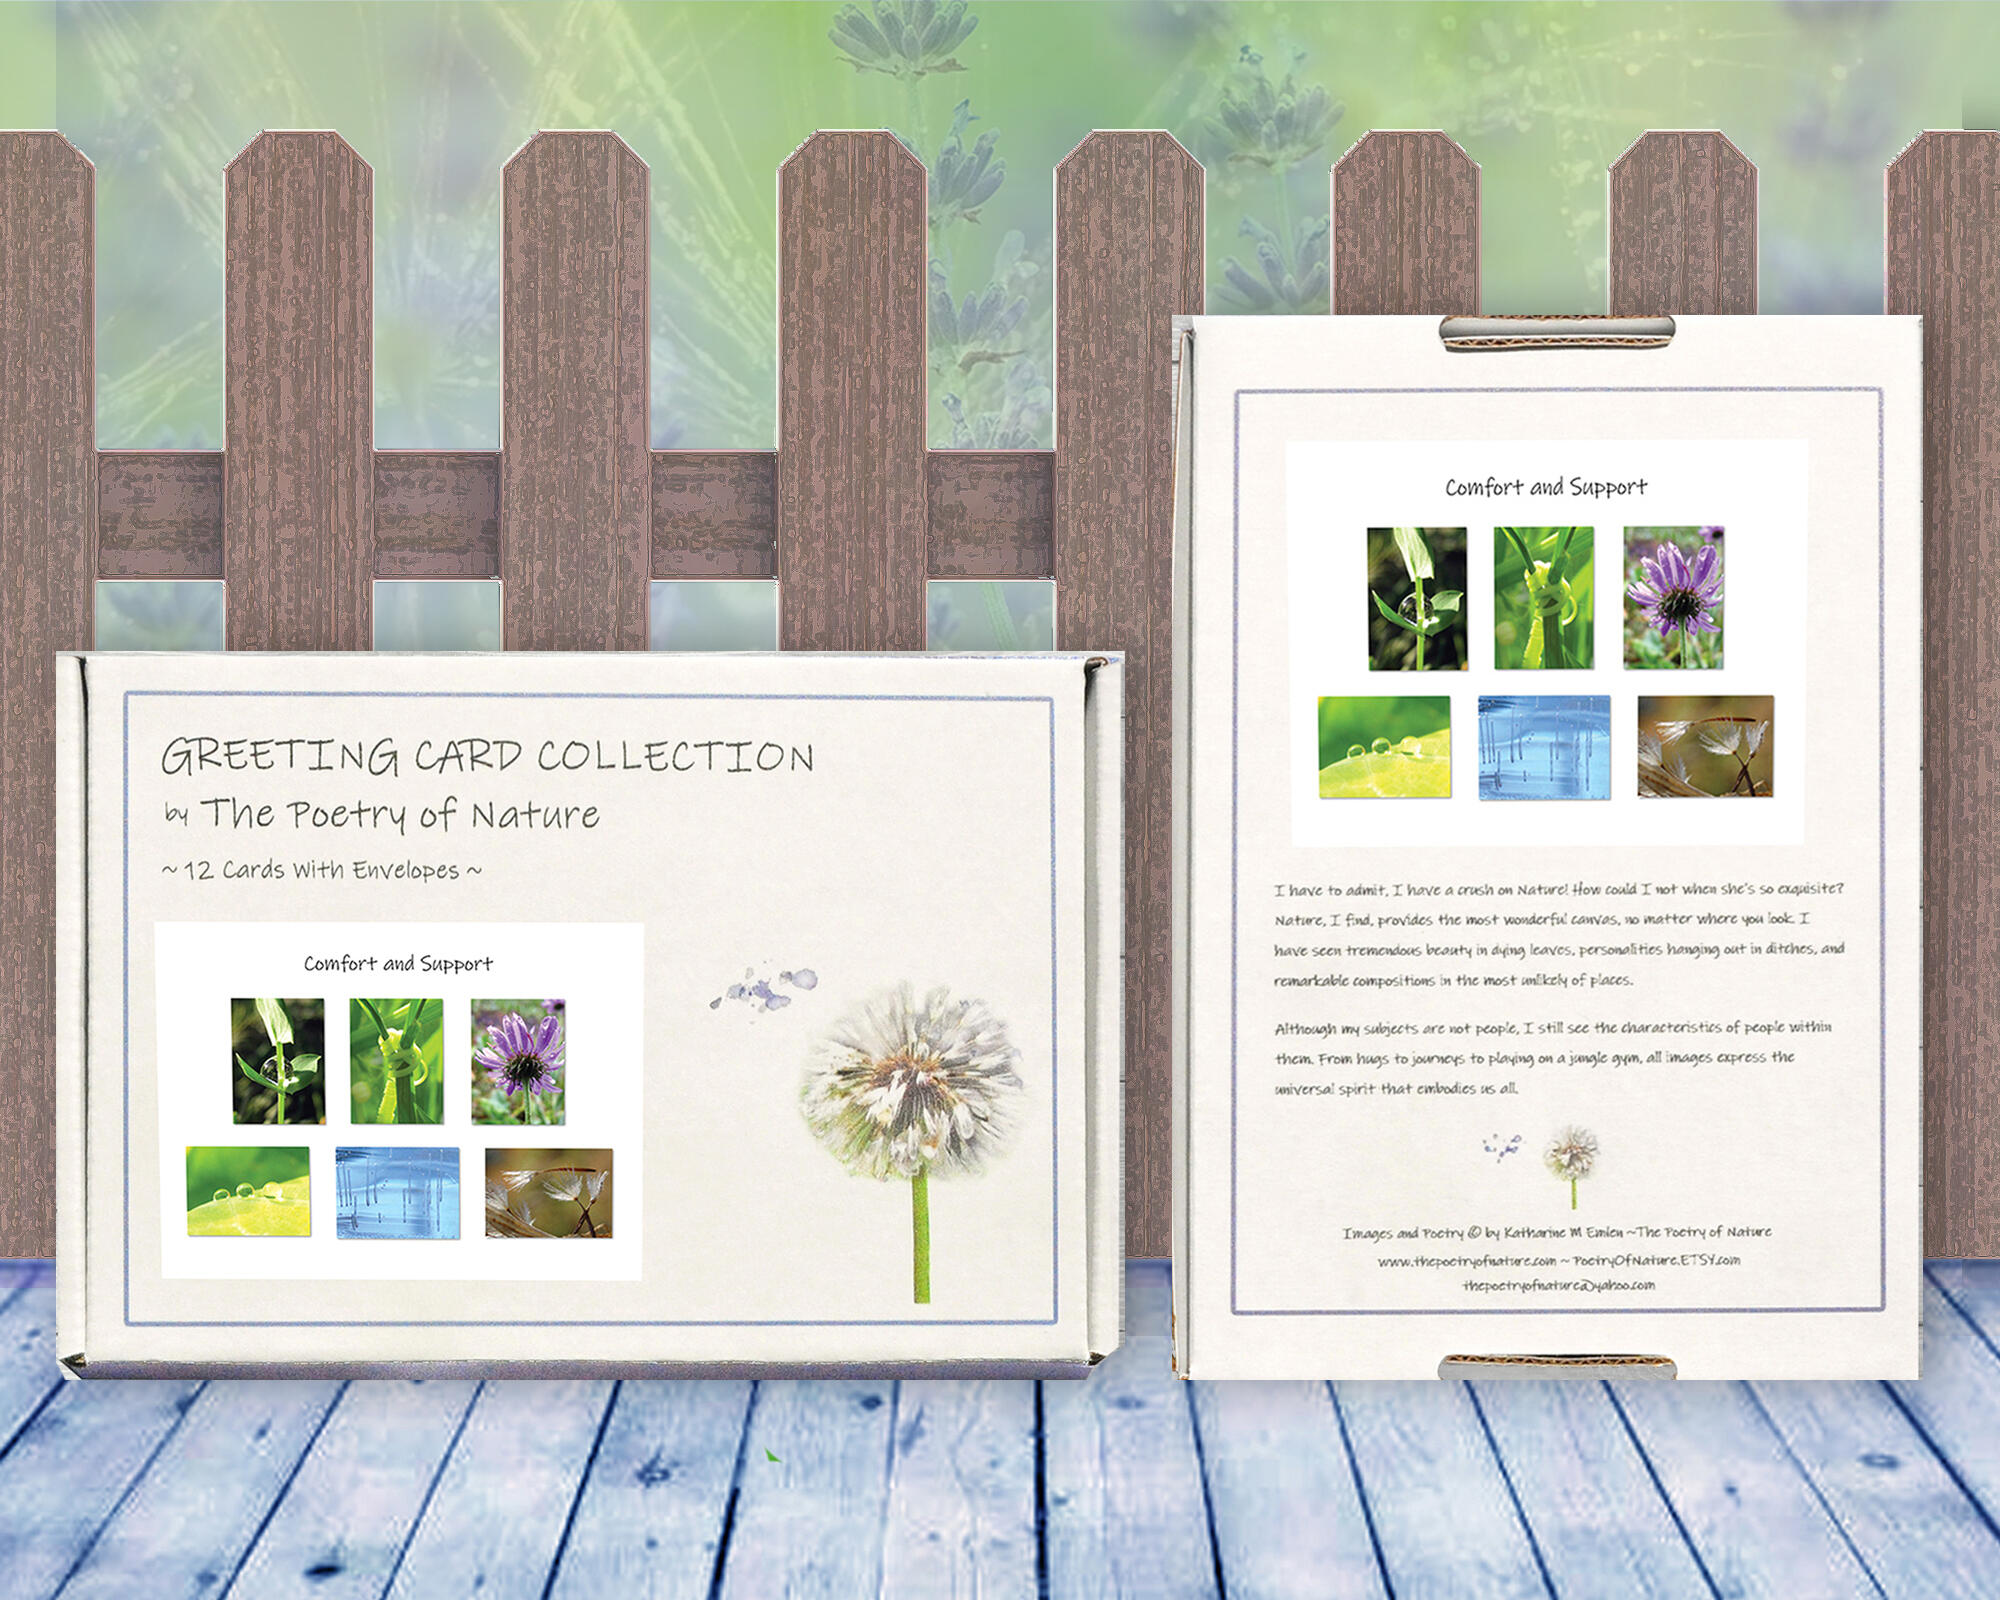 Comfort and Support Greeting Card Collection by The Poetry of Nature